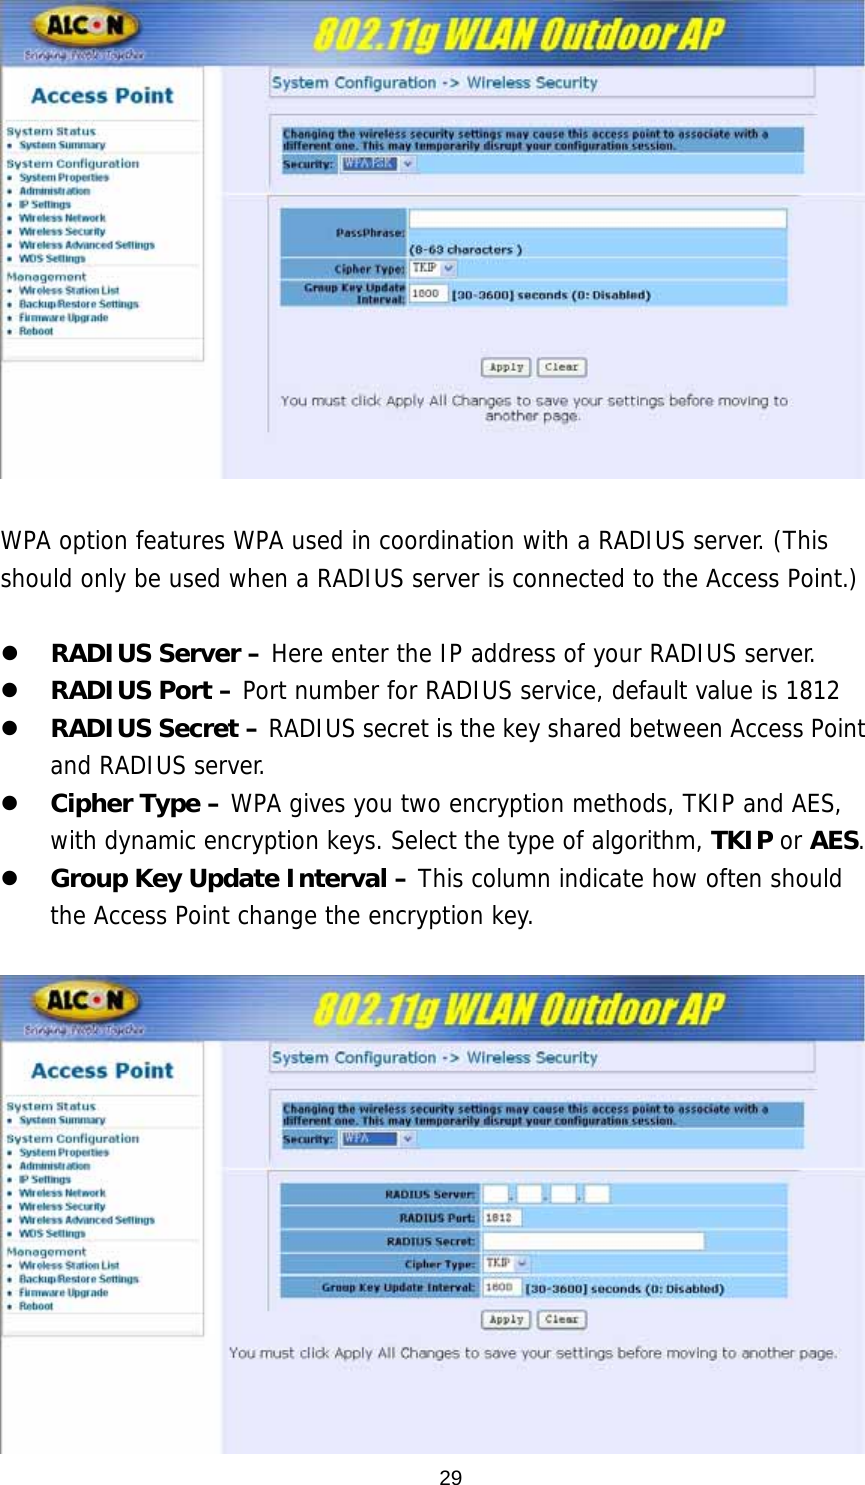   WPA option features WPA used in coordination with a RADIUS server. (This should only be used when a RADIUS server is connected to the Access Point.)   z RADIUS Server – Here enter the IP address of your RADIUS server.  z RADIUS Port – Port number for RADIUS service, default value is 1812 z RADIUS Secret – RADIUS secret is the key shared between Access Point and RADIUS server. z Cipher Type – WPA gives you two encryption methods, TKIP and AES, with dynamic encryption keys. Select the type of algorithm, TKIP or AES. z Group Key Update Interval – This column indicate how often should the Access Point change the encryption key.    29